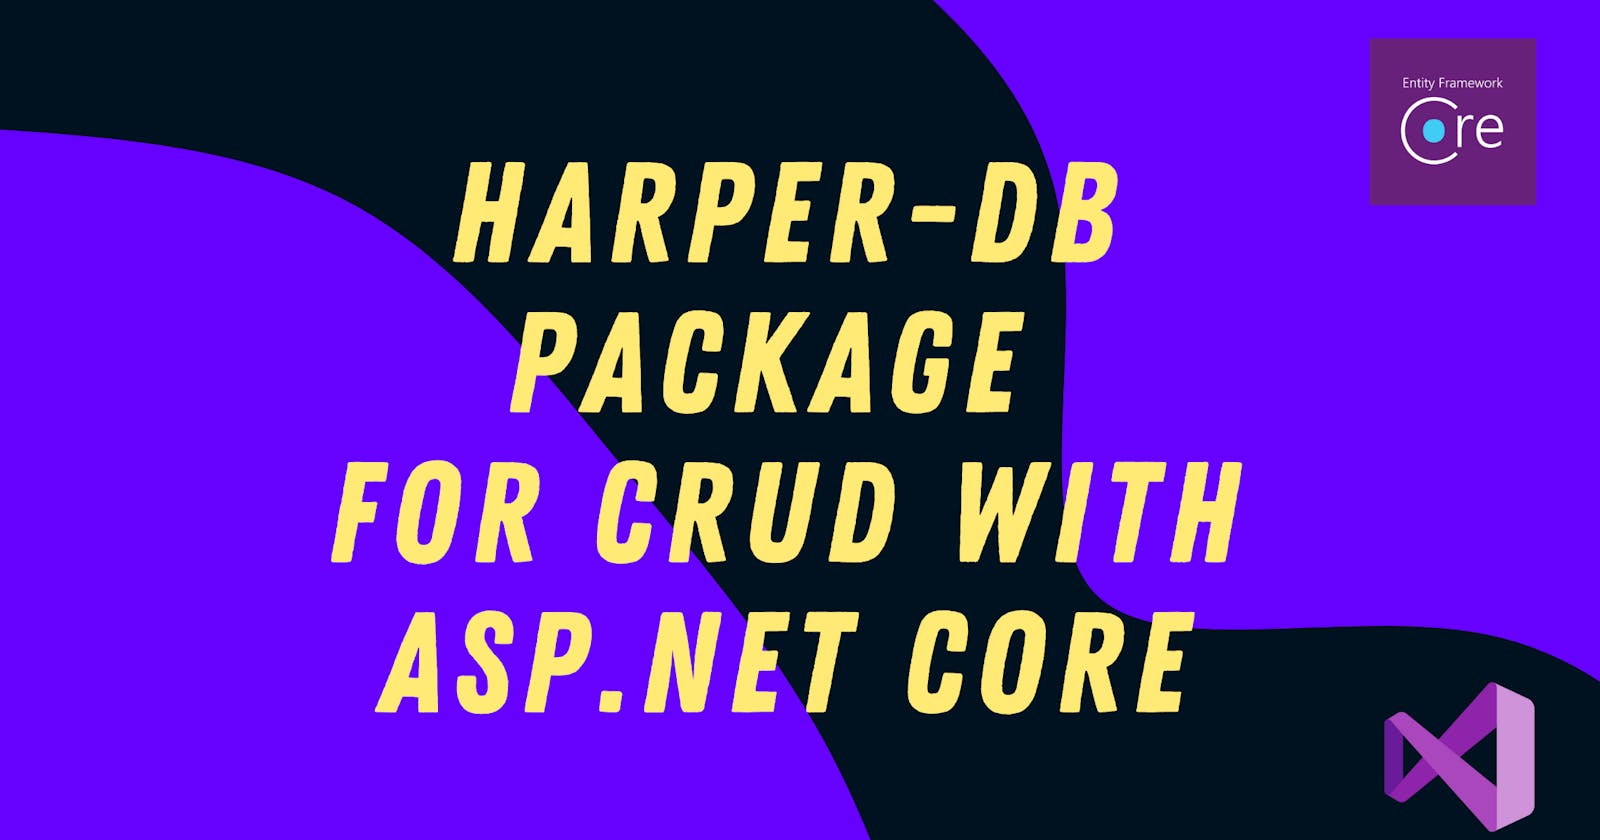 HarperDB Nuget pkg  to perform CRUD operations with ASP.NET CORE